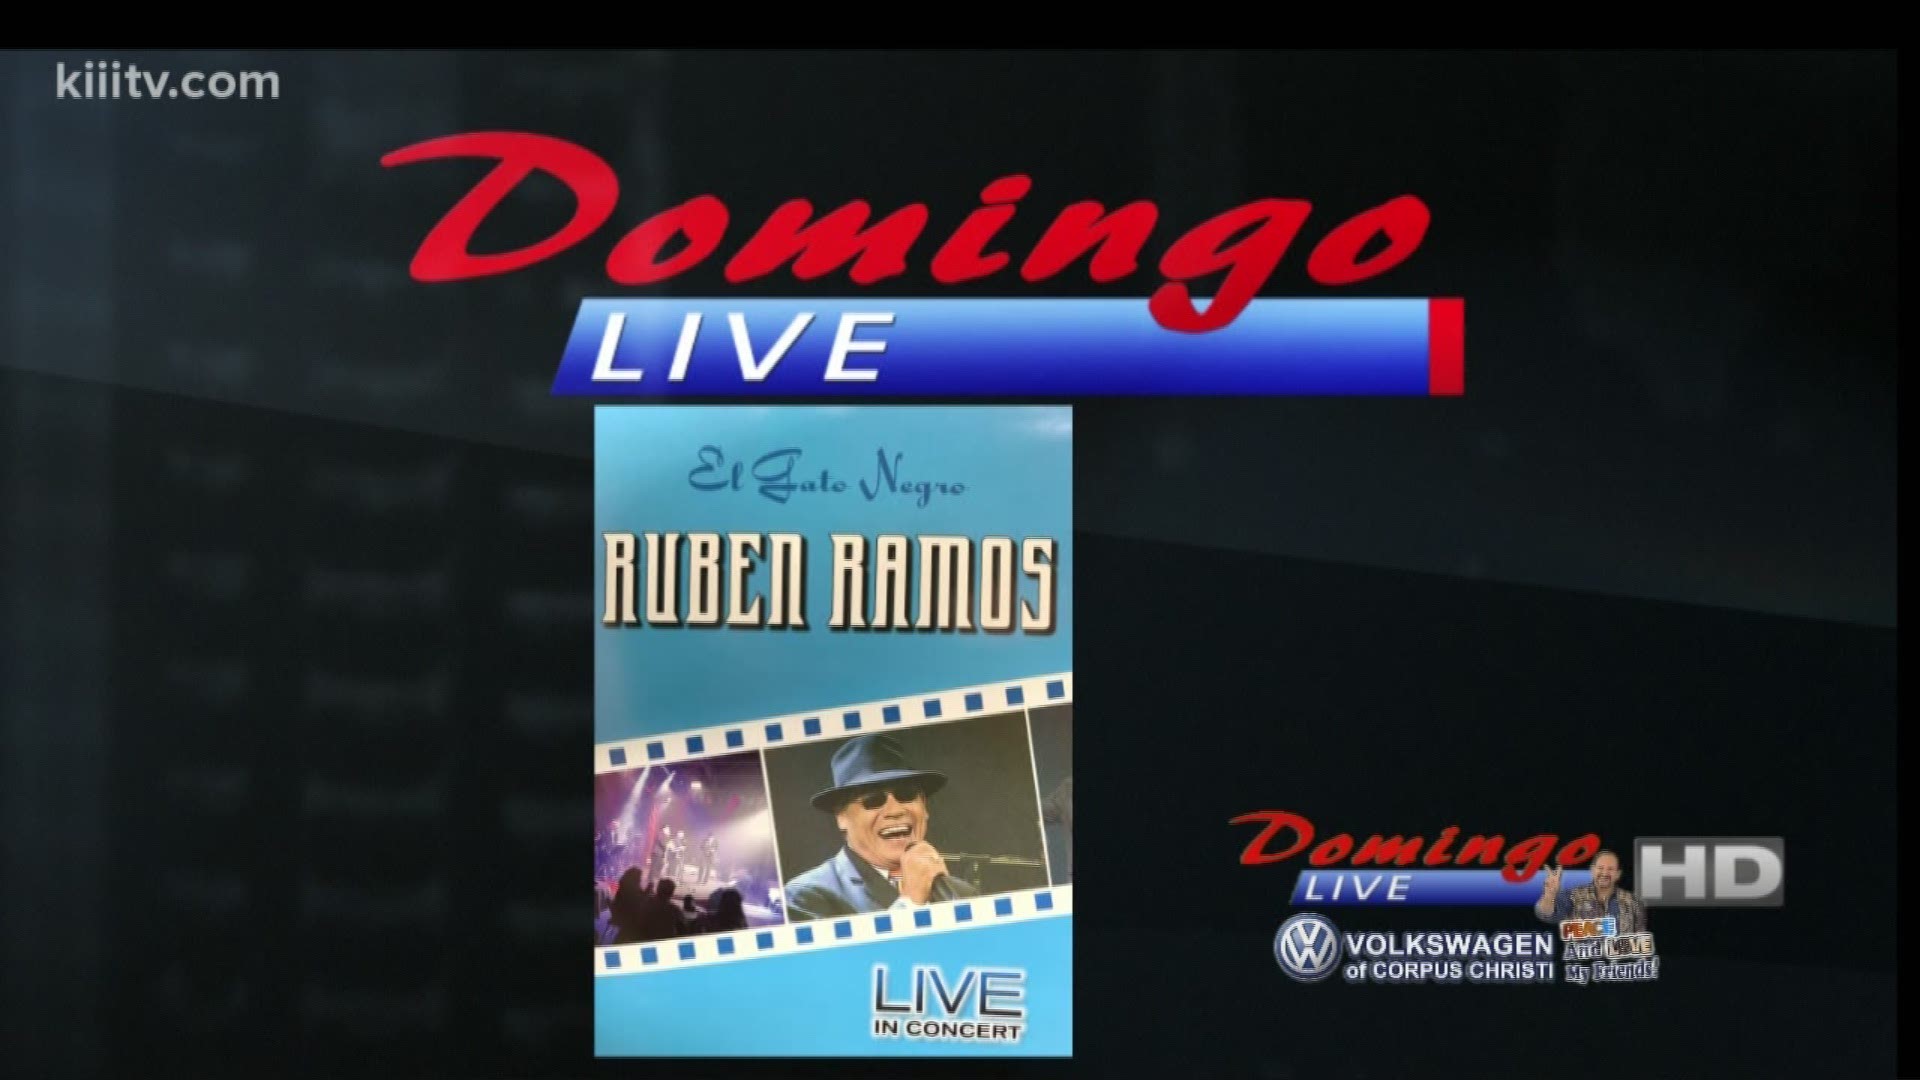 Ruben Ramos performance "Mil Noches", courtesy of Q-Productions, on Domingo Live!